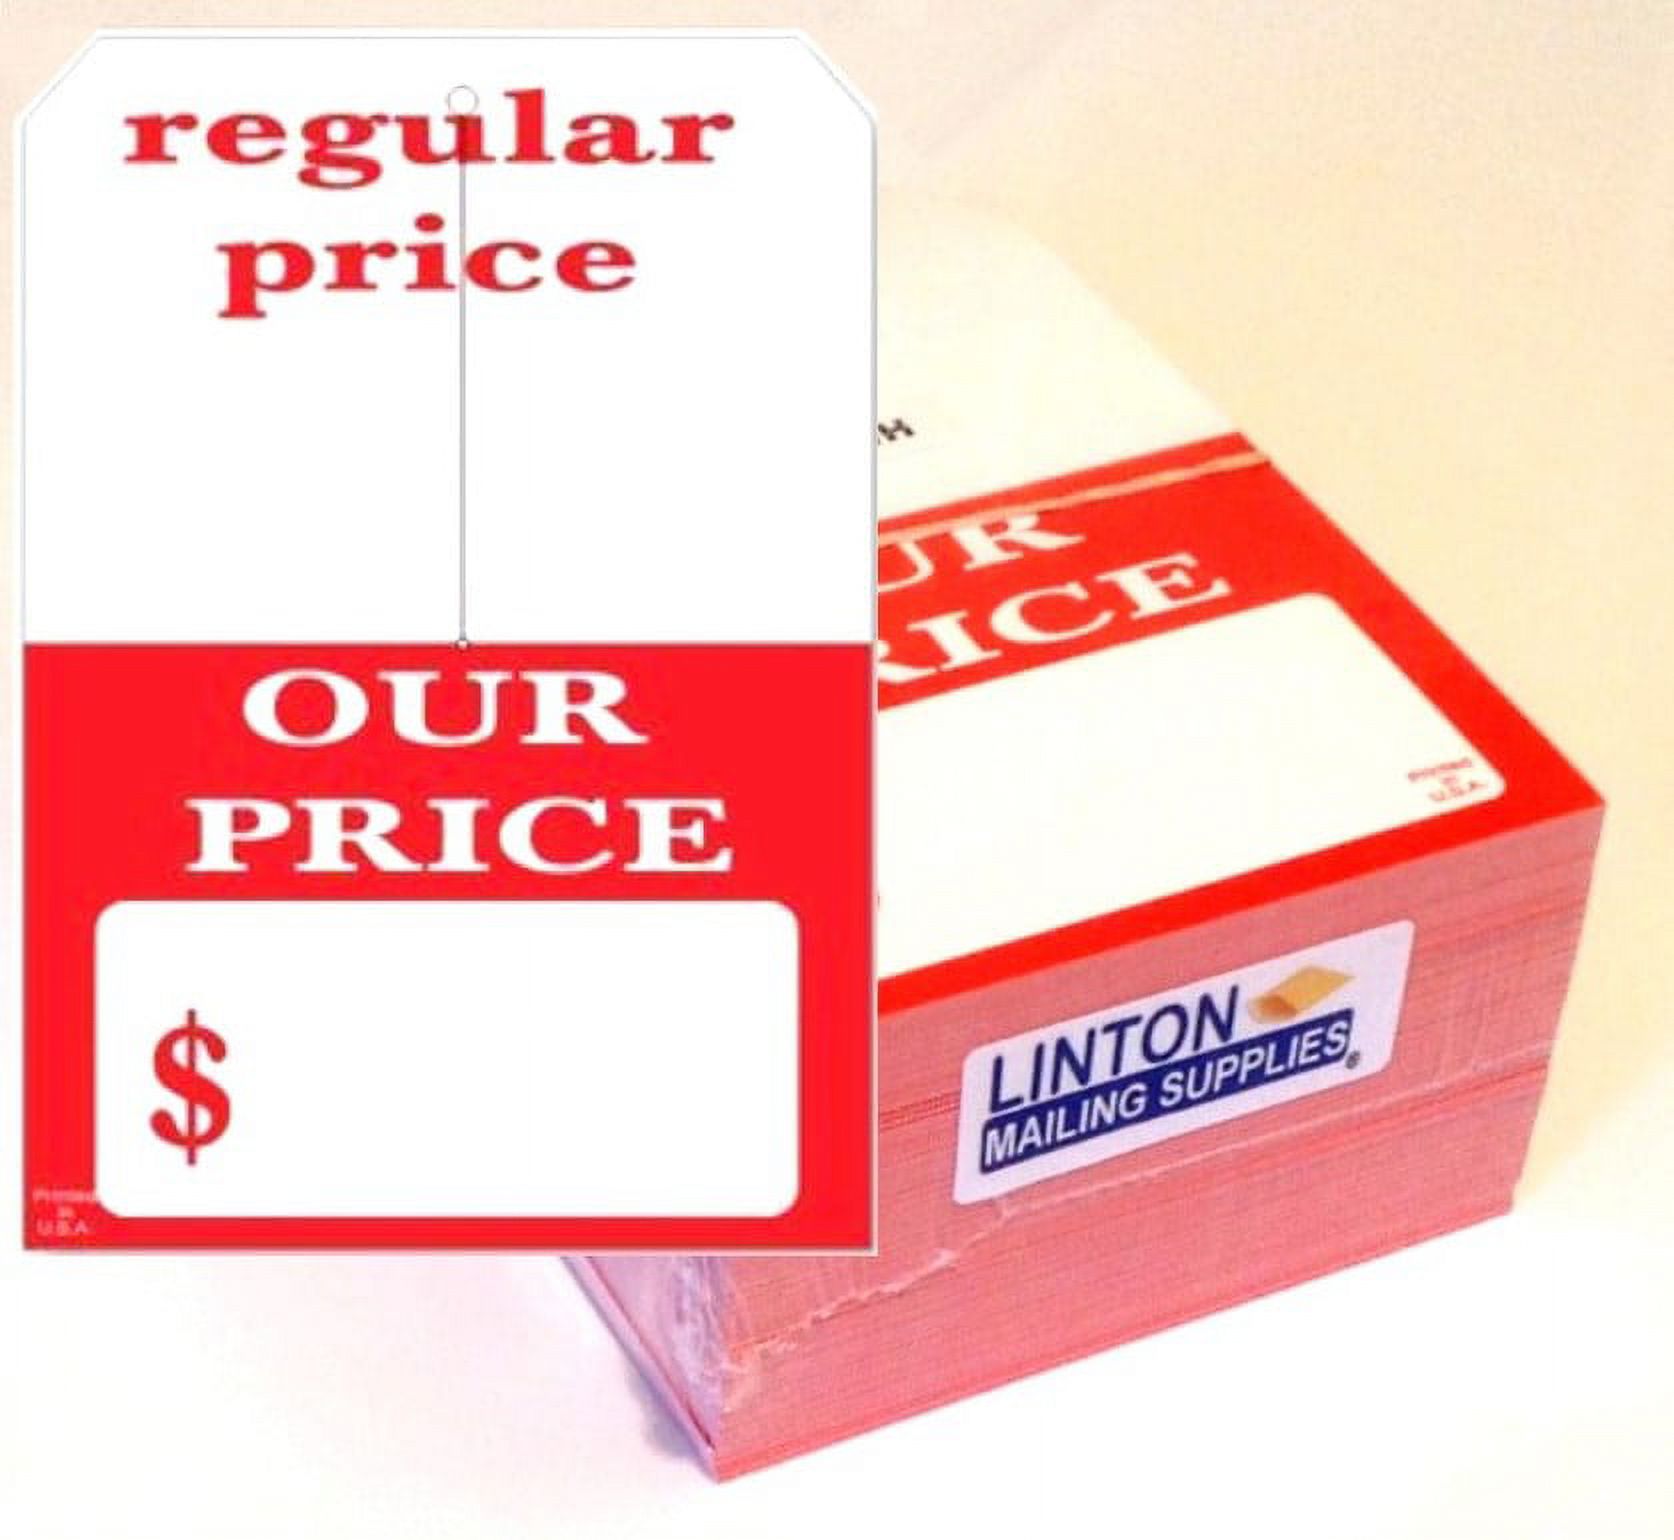 regular price - OUR PRICE Large Merchandise Tag w 3.25 Slit, 5 x 7  Cardstock 12 Pt., Red and White, 2 Clip Corners - Pack of 250 Tags 